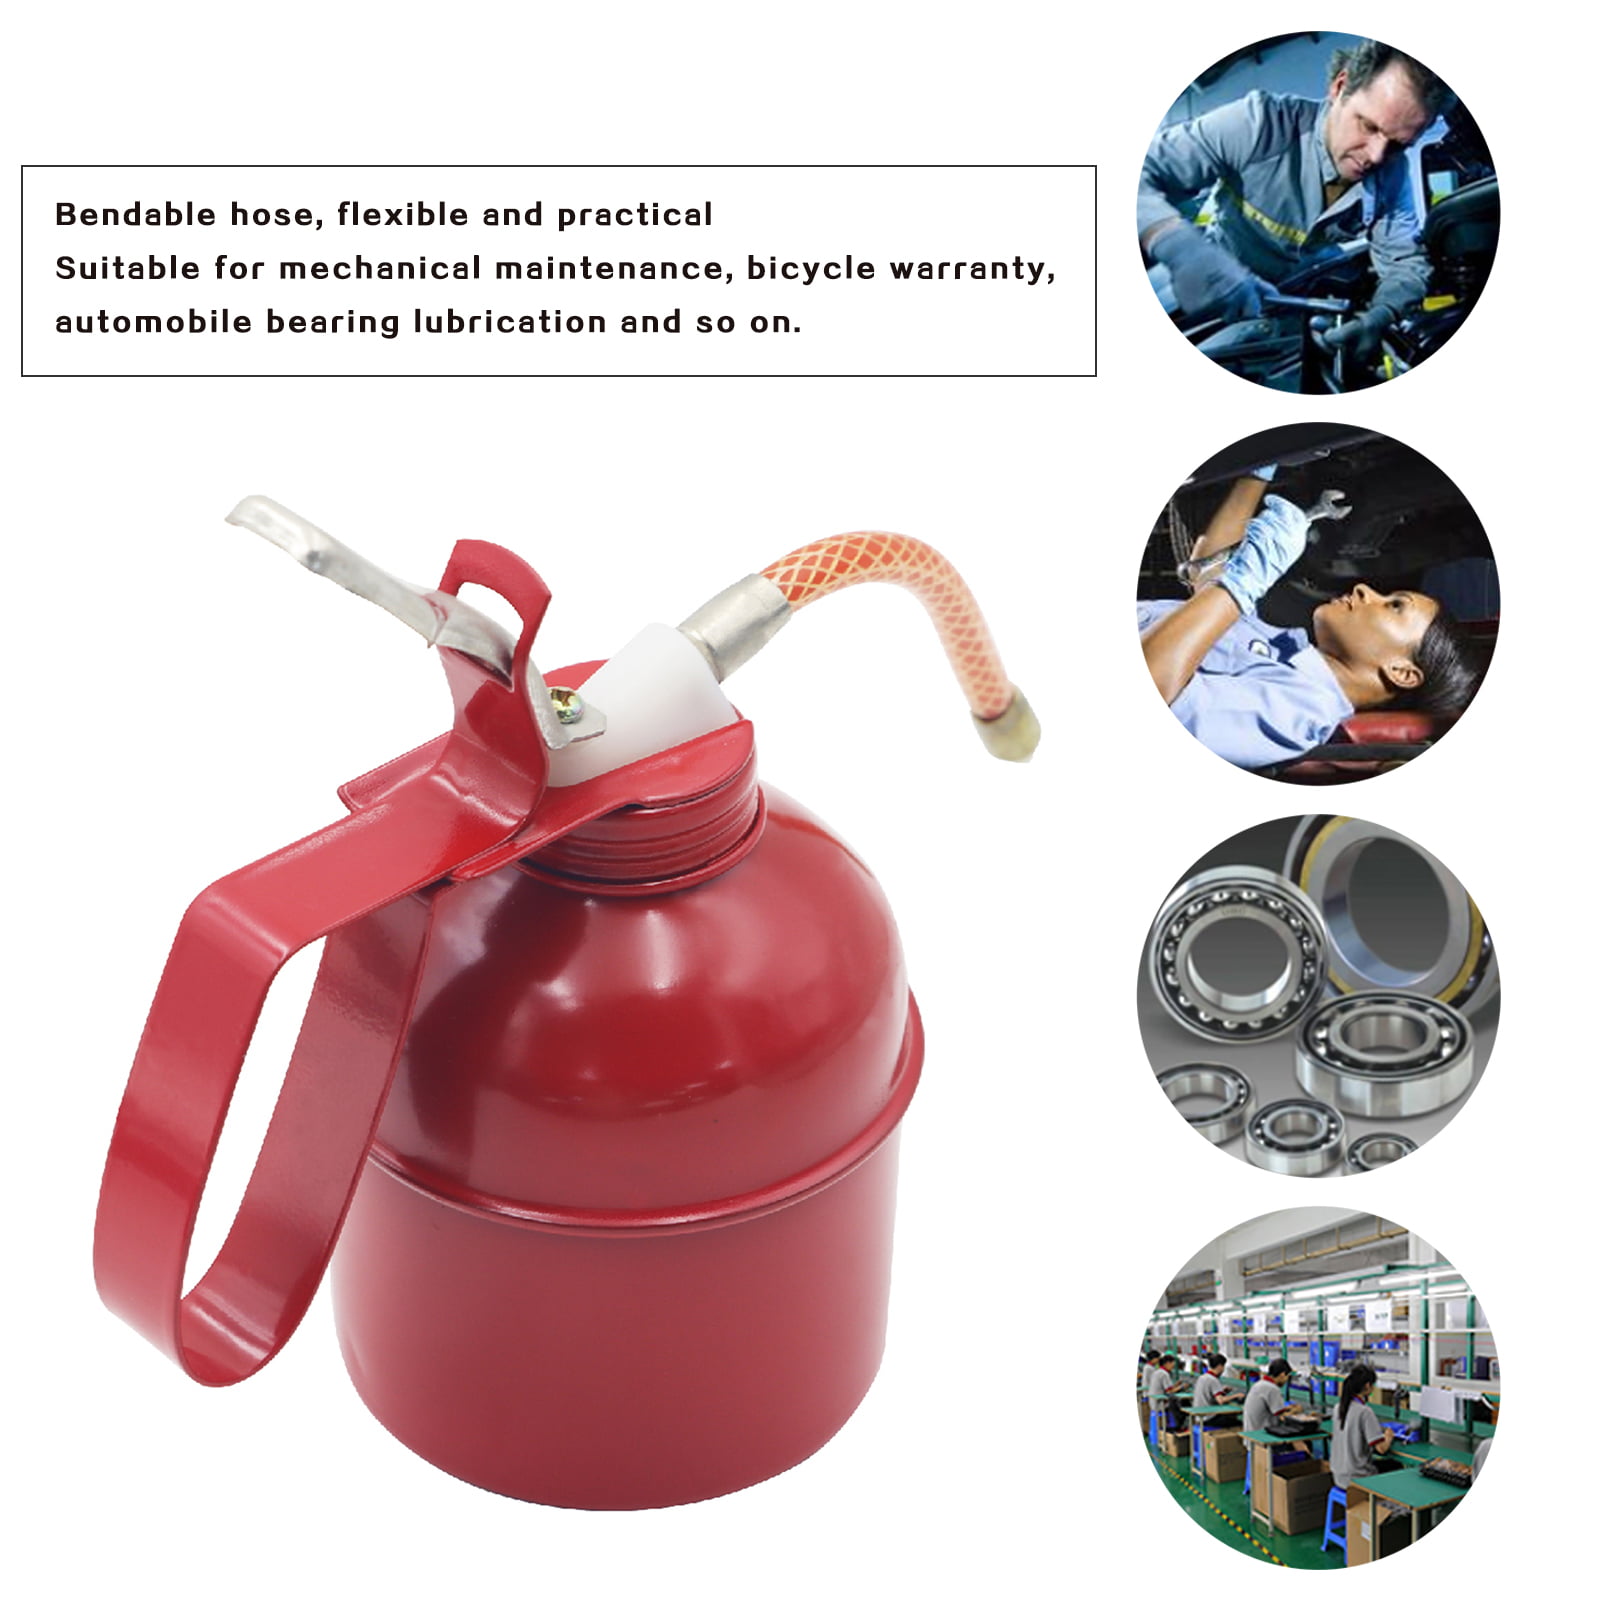 500cc hose oil can, manual oil can, small oil drip can, push-type oil can